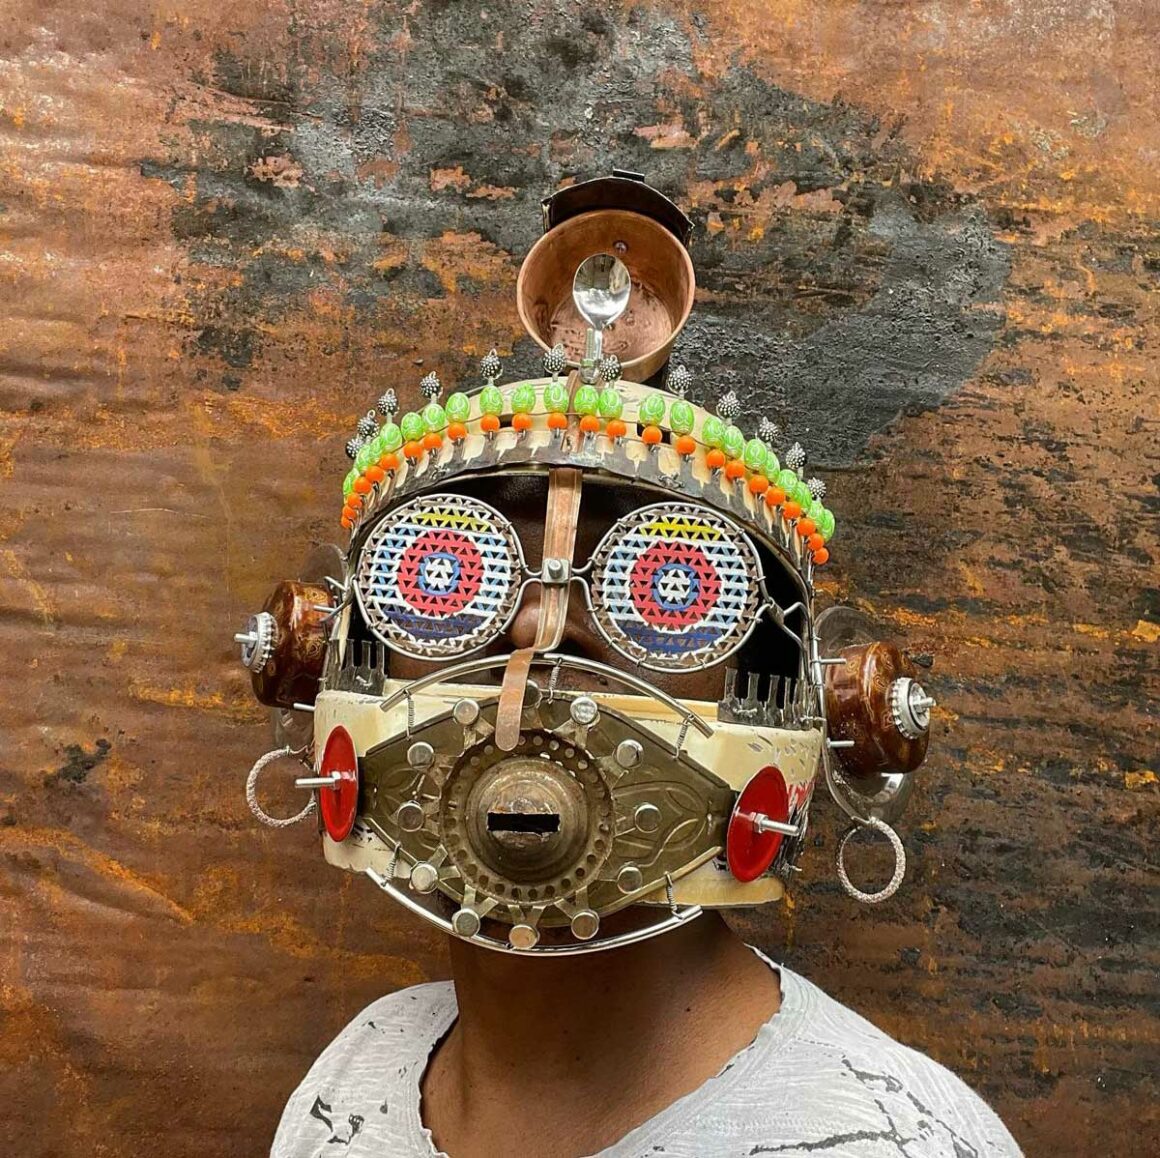 Cyrus Kabiru creatively uses recycled rubbish and old material mostly collected in the streets of Nairobi to explore the theme of transformation and imagination. | Image: Cyrus Kabiru